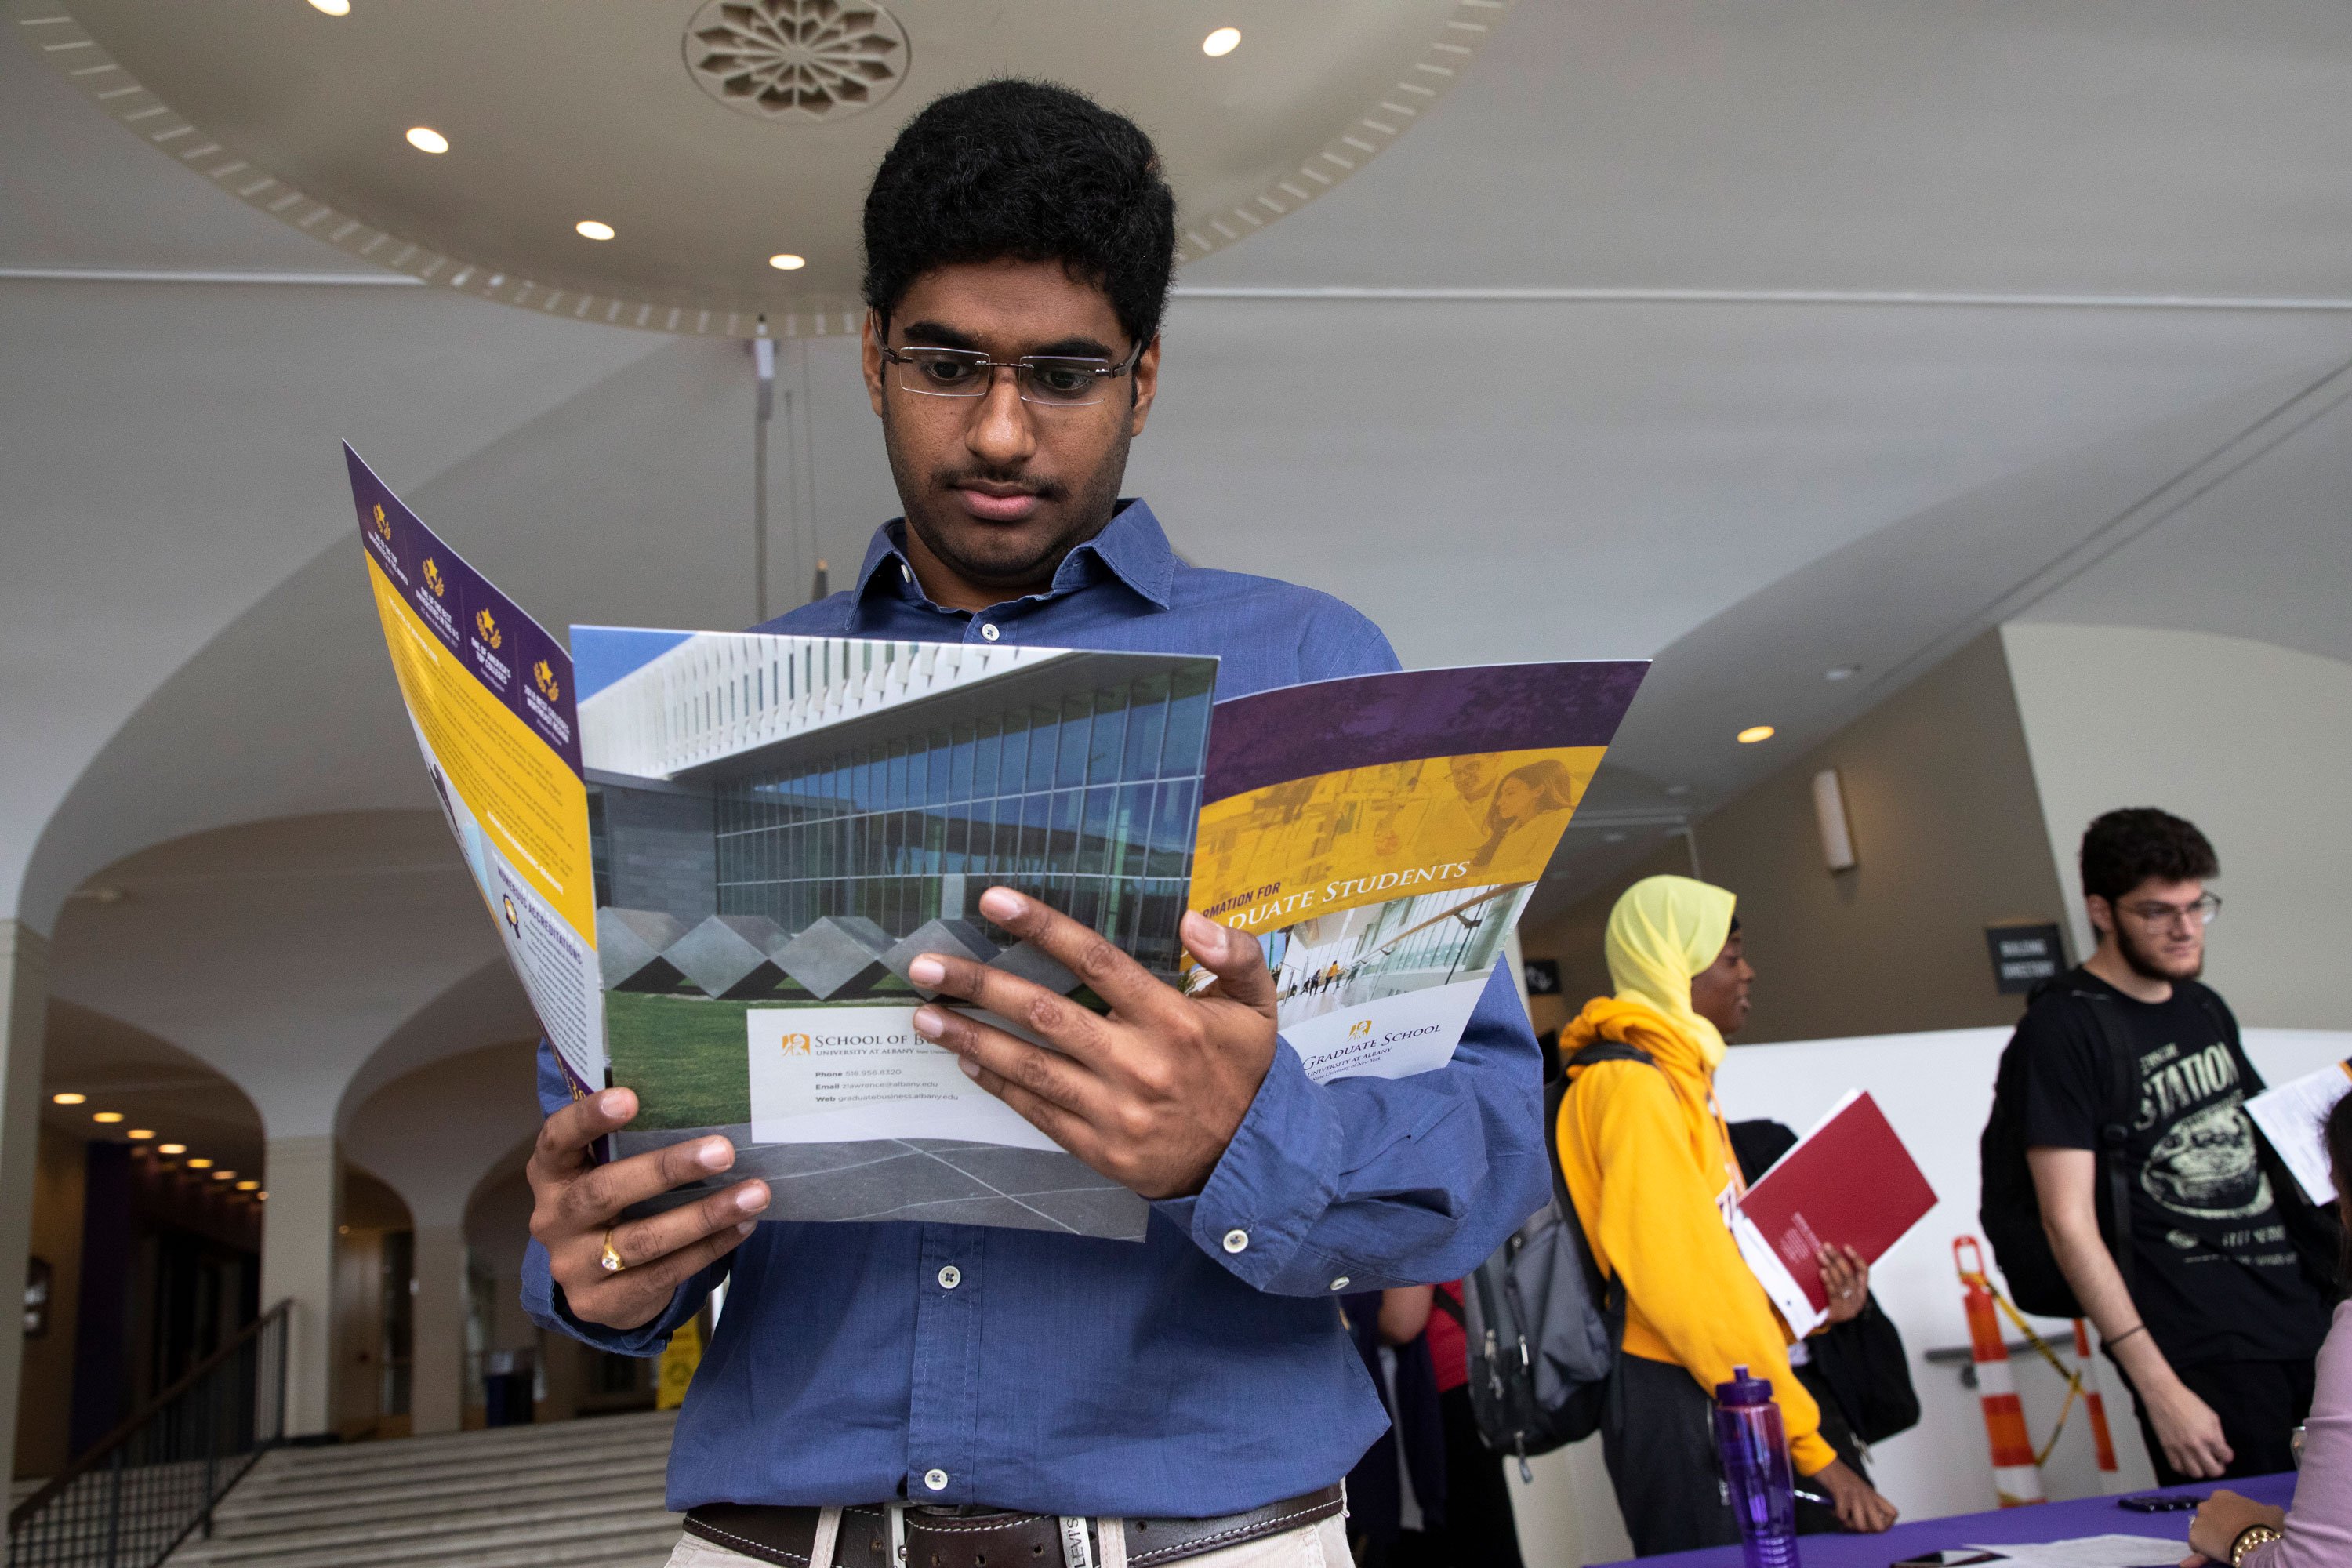 A student attends UAlbany’s annual Graduate & Professional School Fair on the Uptown Campus.